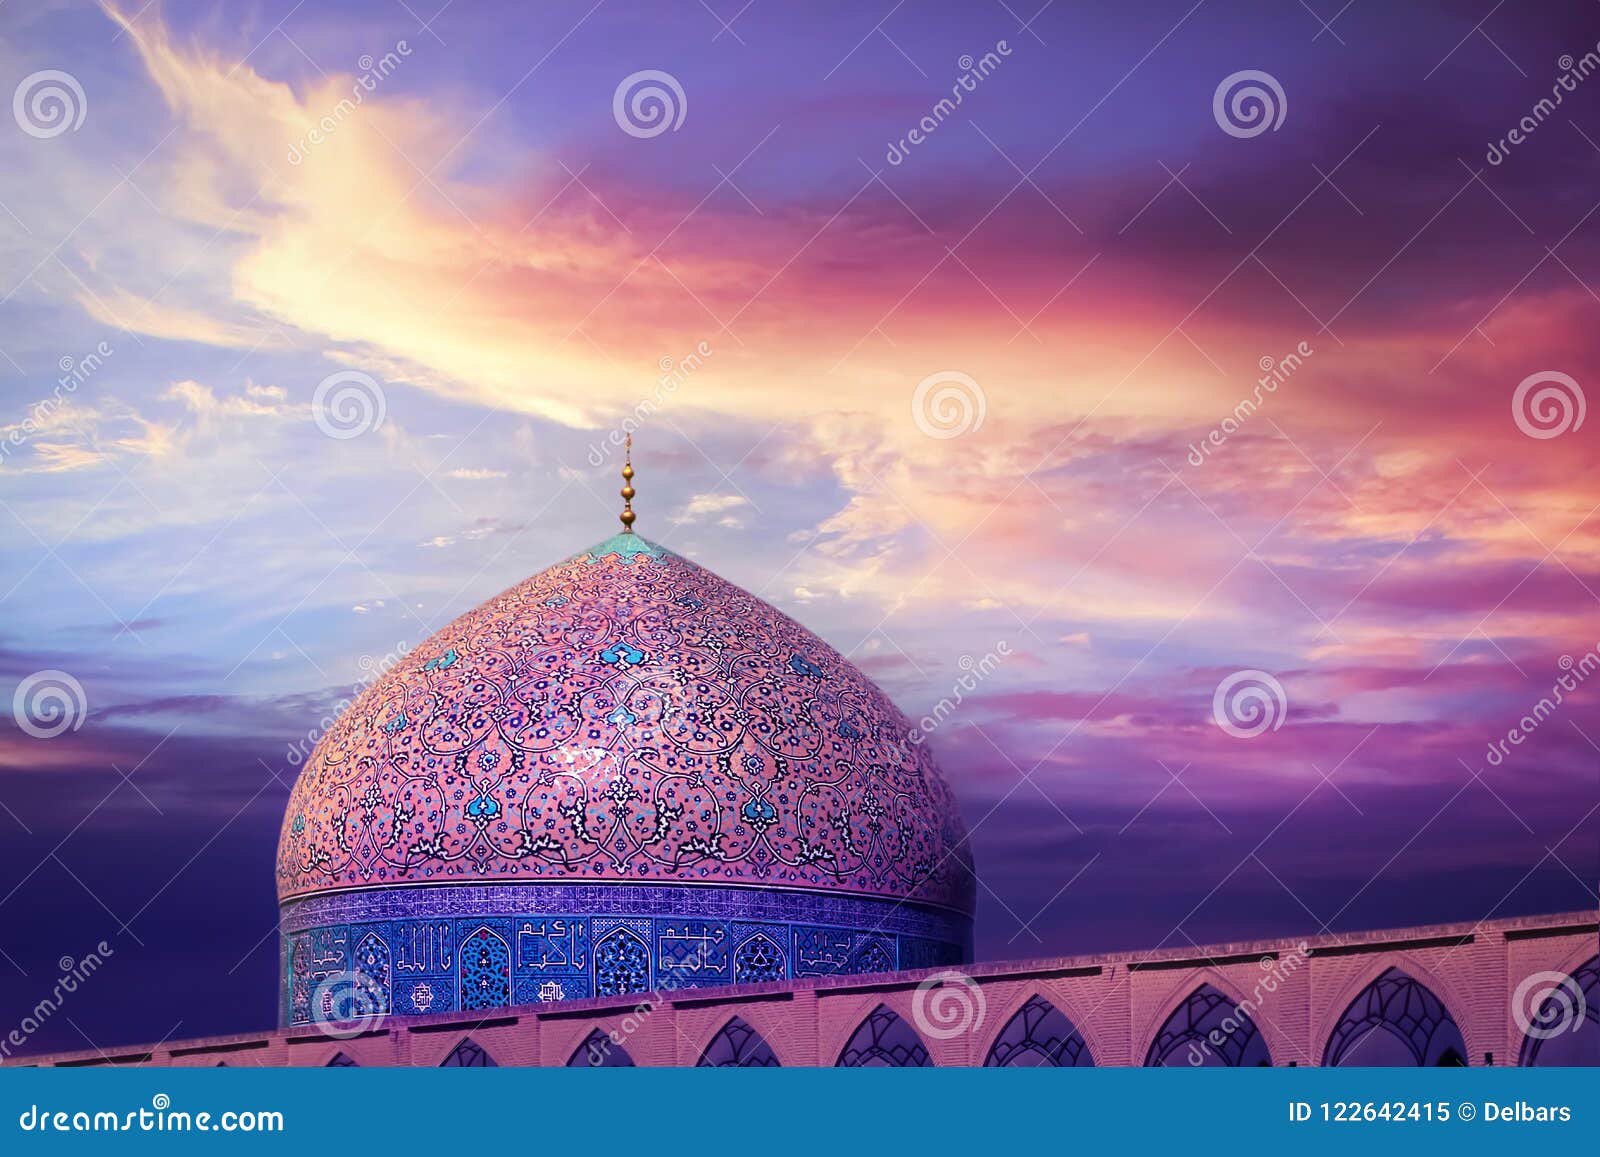 fragment of traditional iranian architecture against beatiful purple sky and yellow and pink clouds. beautiful sunset.